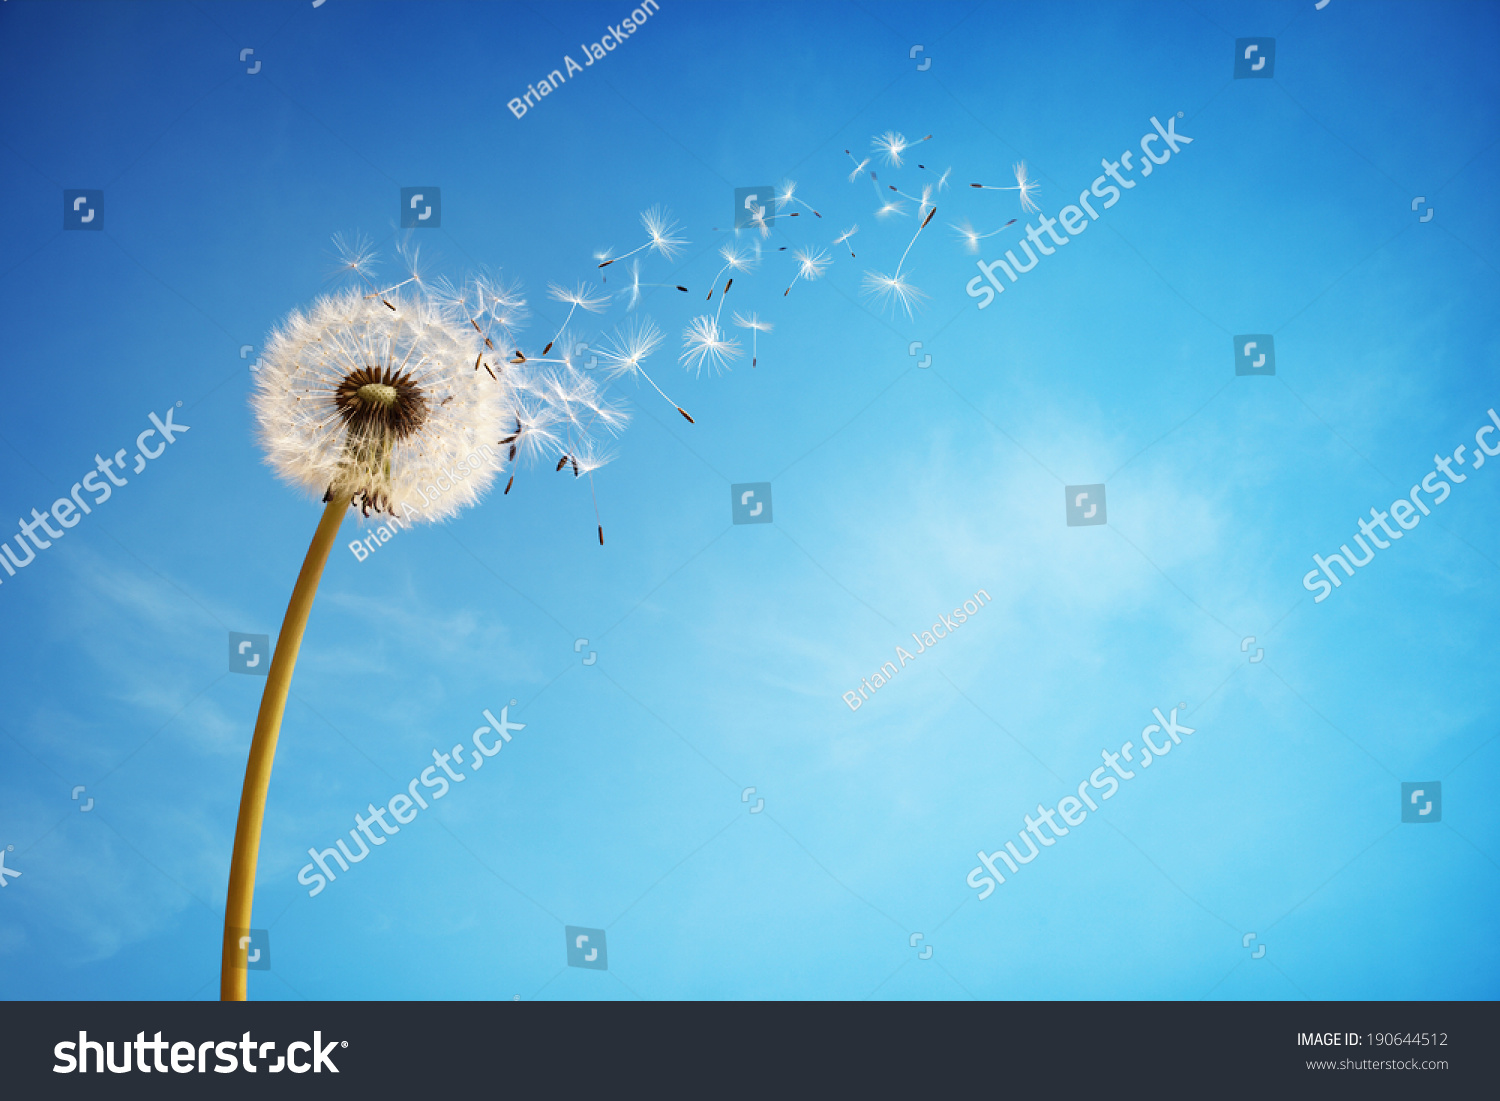 Dandelion with seeds blowing away in the wind across a clear blue sky with copy space #190644512